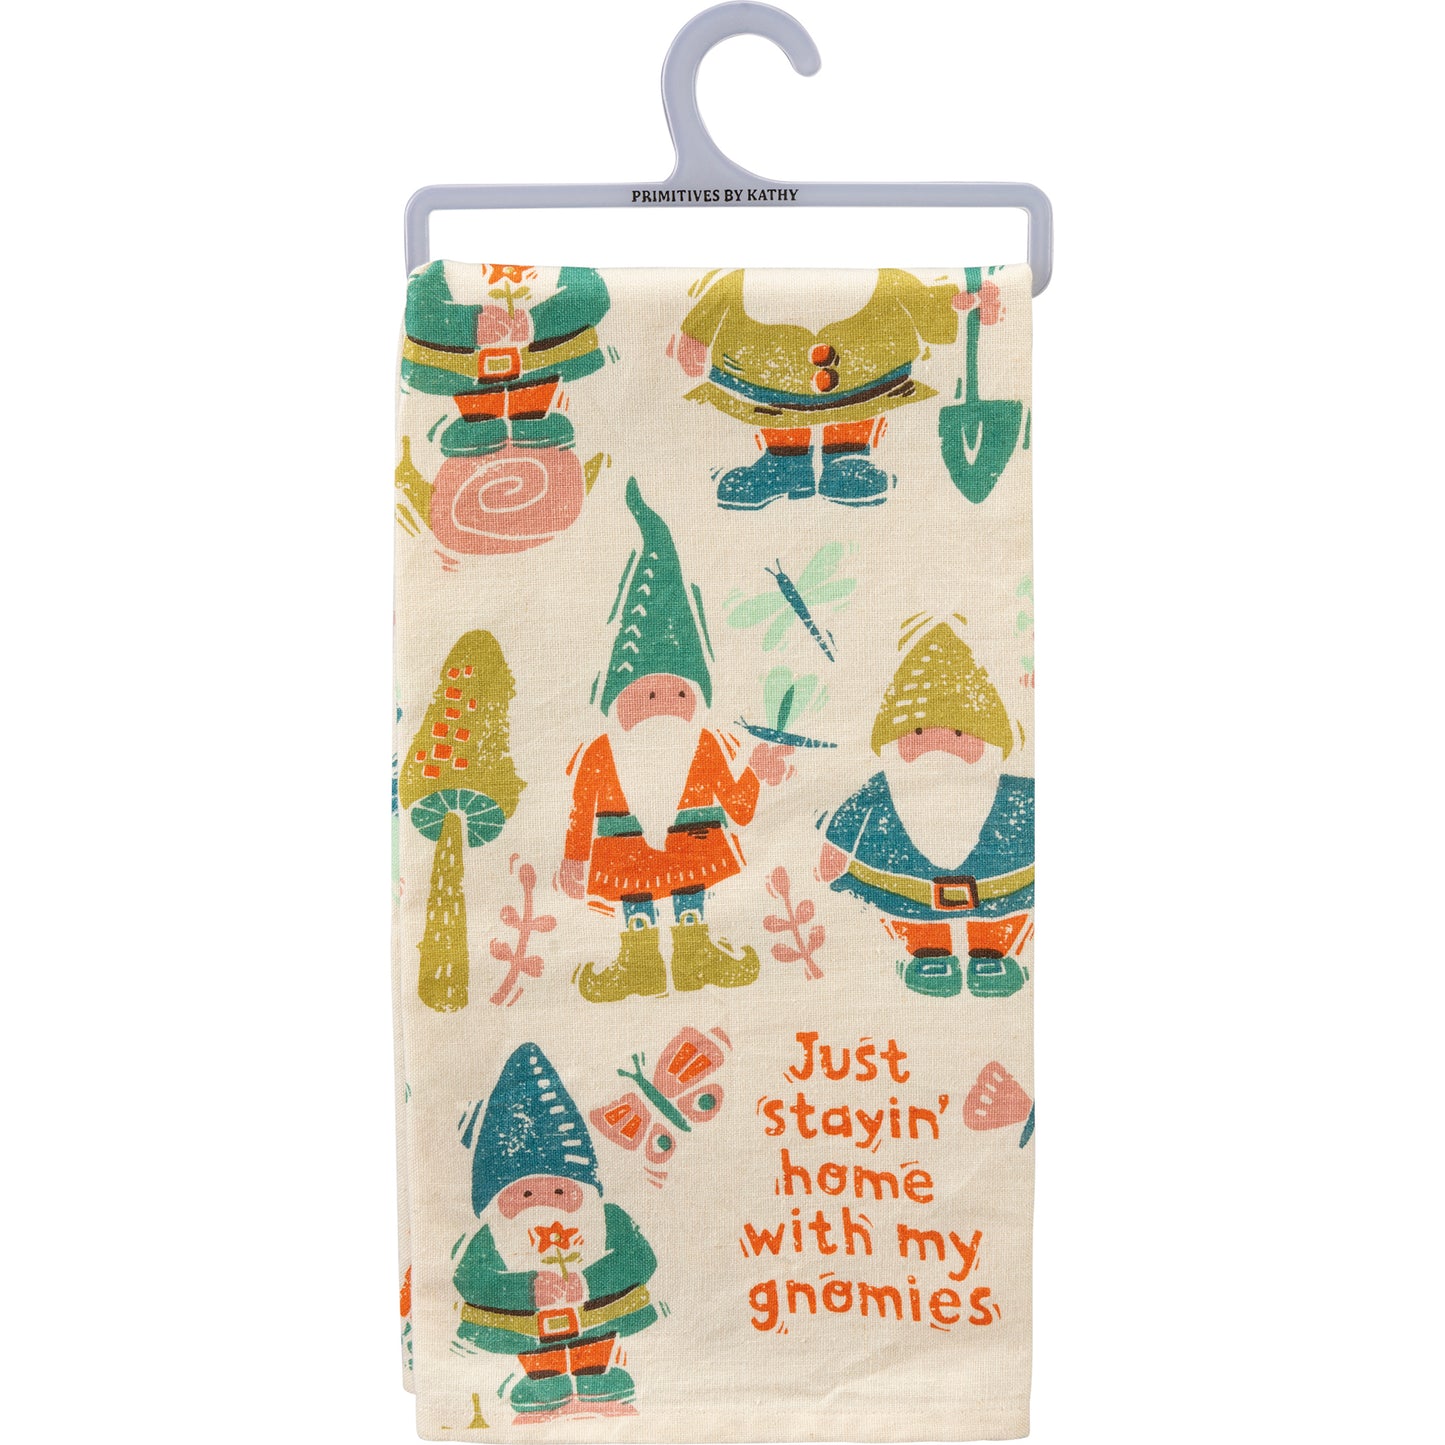 Dish Towel - JUST STAYIN' HOME WITH MY GNOMIES